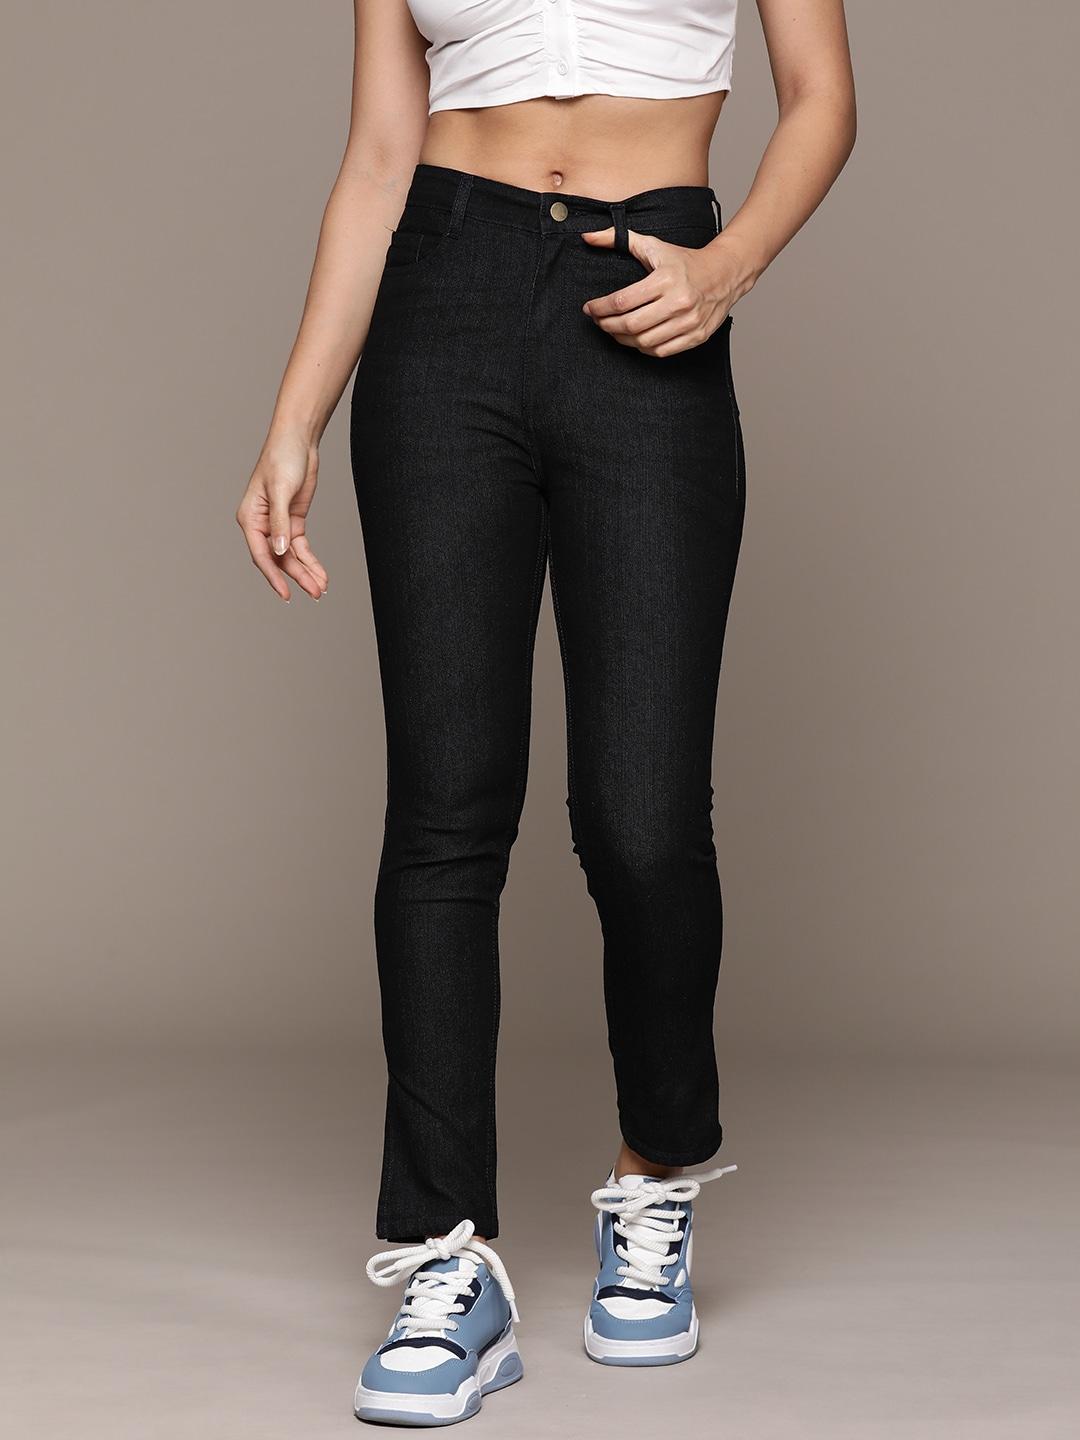 roadster-women-slim-fit-high-rise-stretchable-jeans